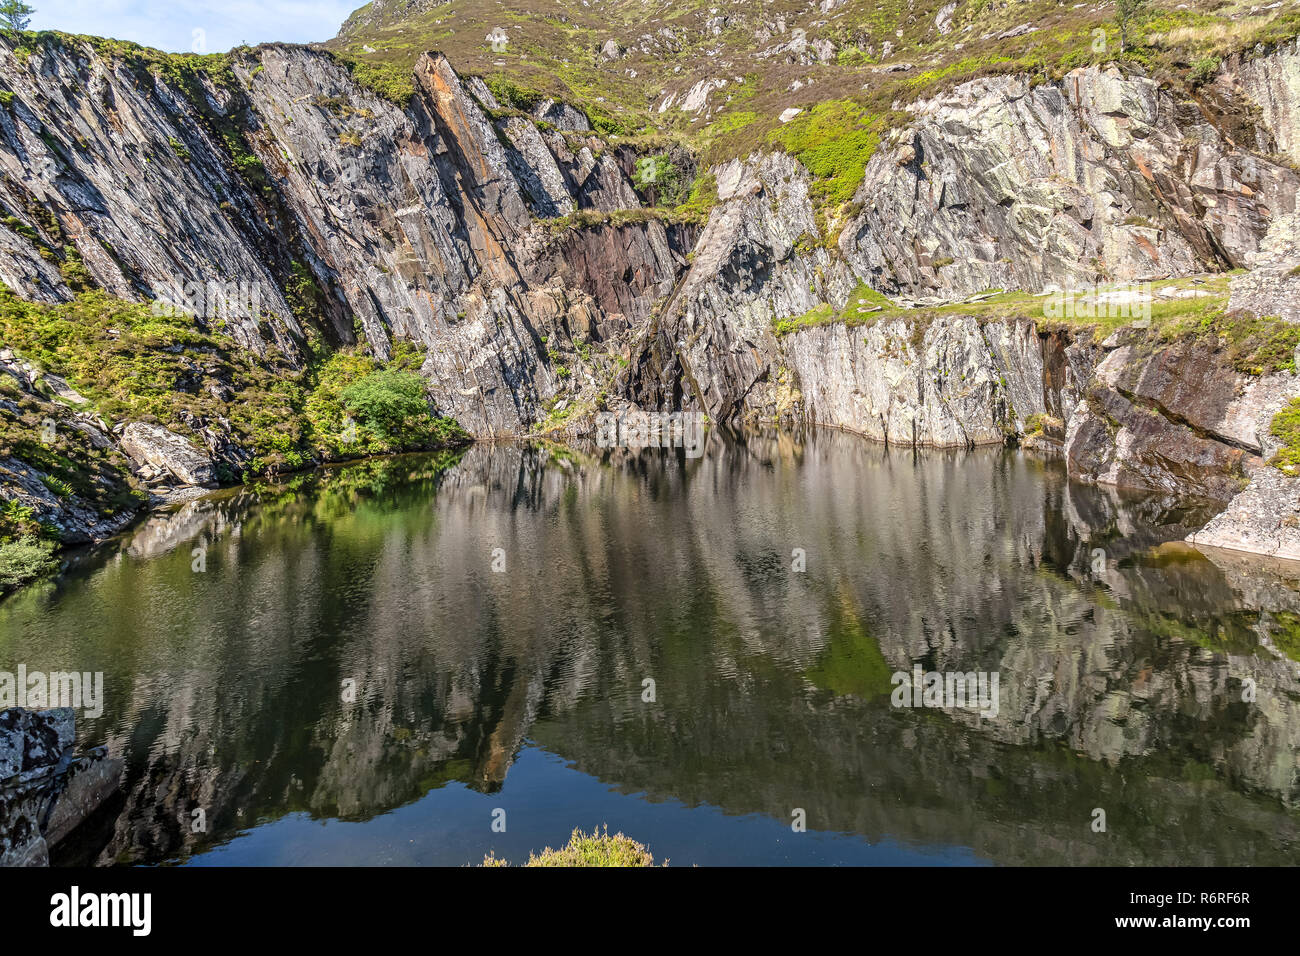 A disused and flooded slate quarry on the path towards Moel Siabod, a mountain in the Snowdonia National Park in North Wales. Stock Photo